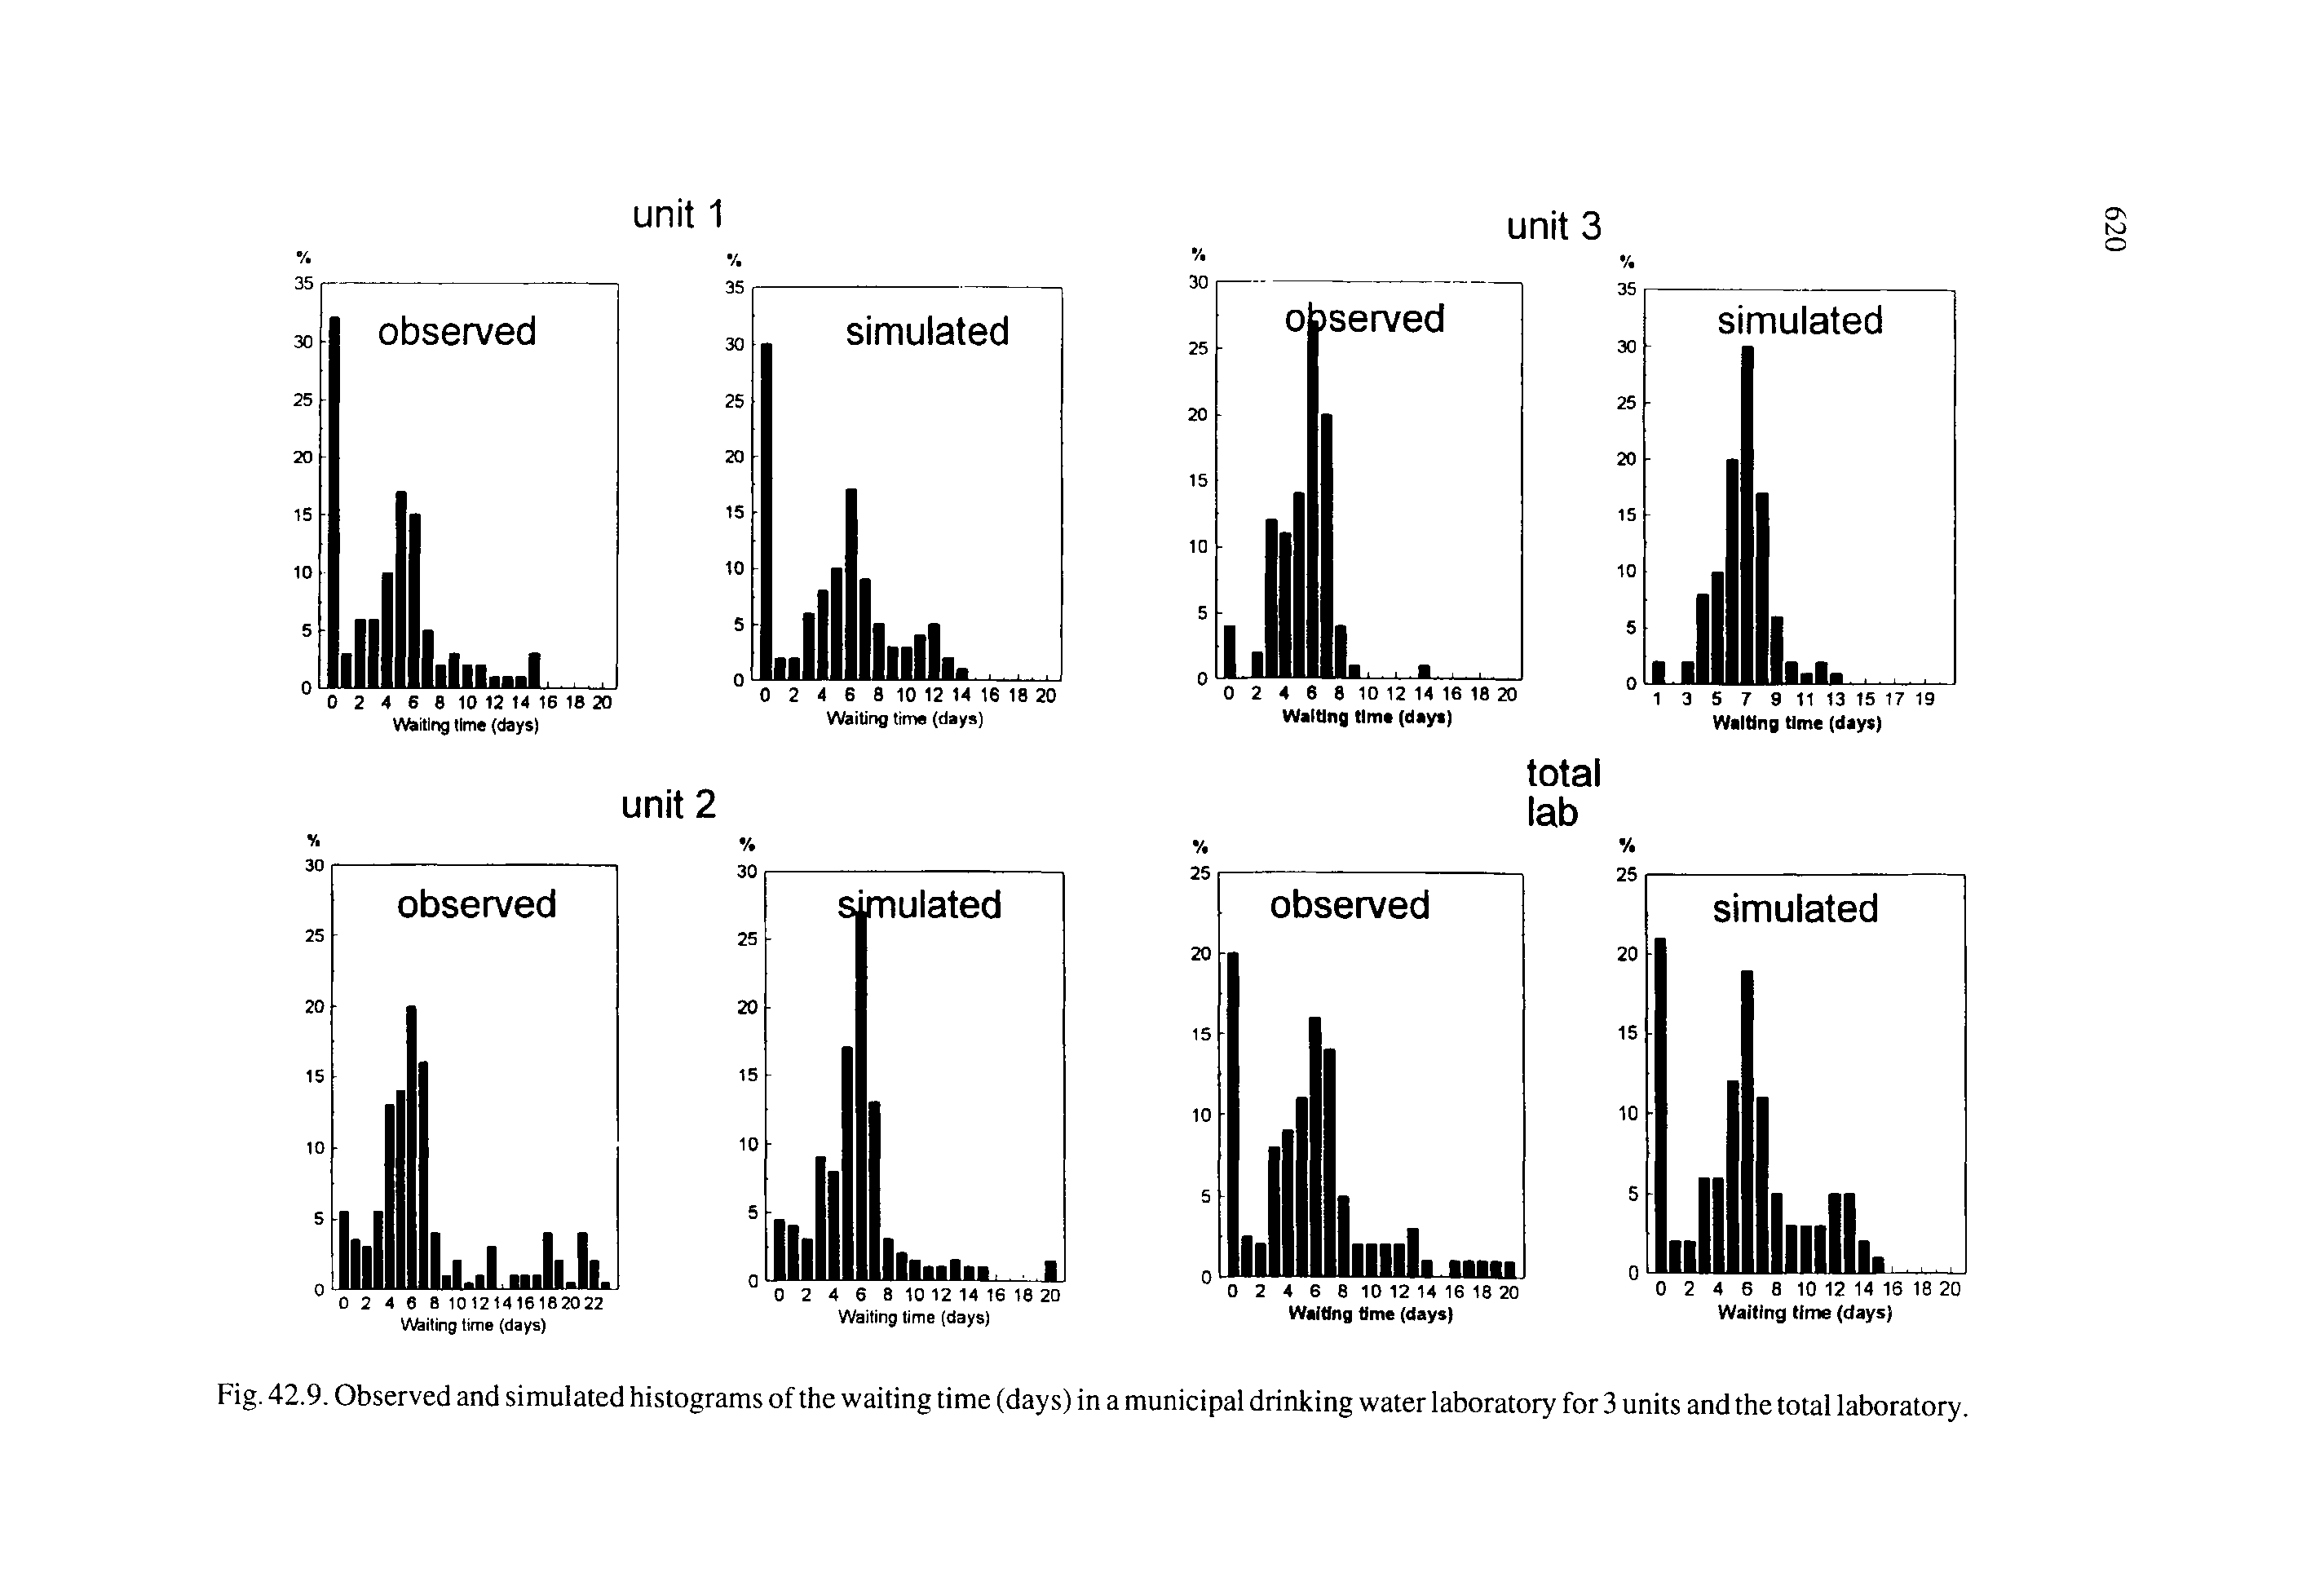 Fig. 42.9. Observed and simulated histograms of the waiting time (days) in a municipal drinking water laboratory for 3 units and the total laboratory...